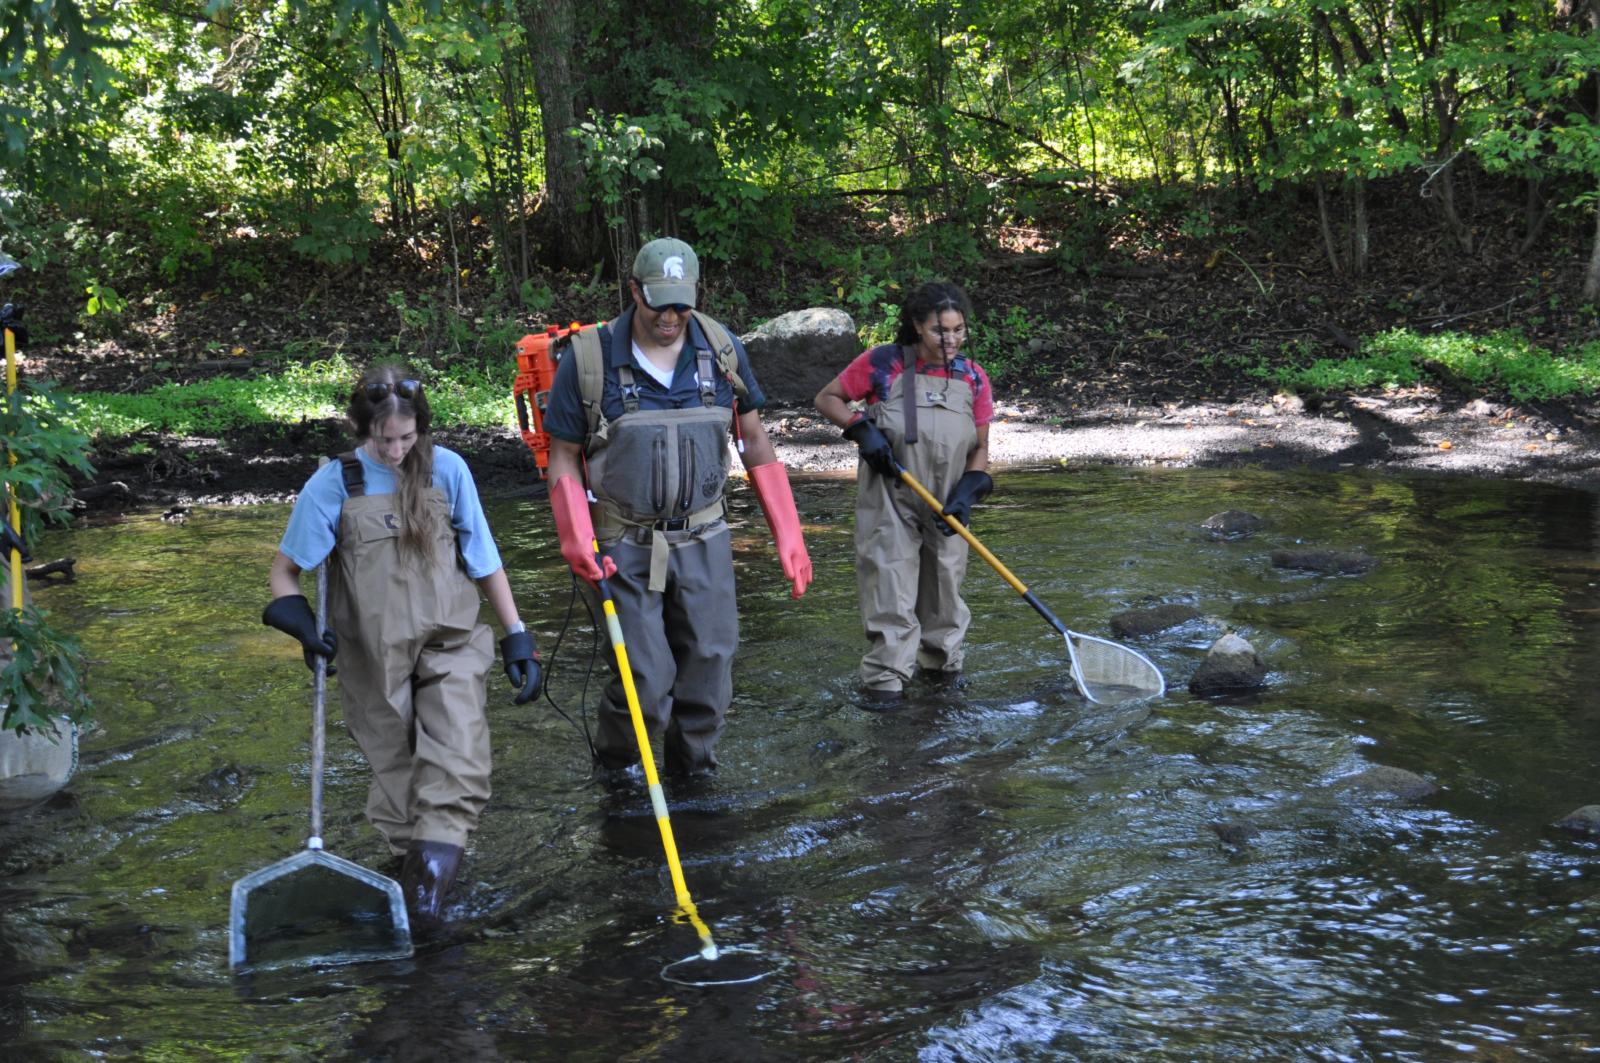 Brian Roth (center) electrofishing in a forest stream with two students